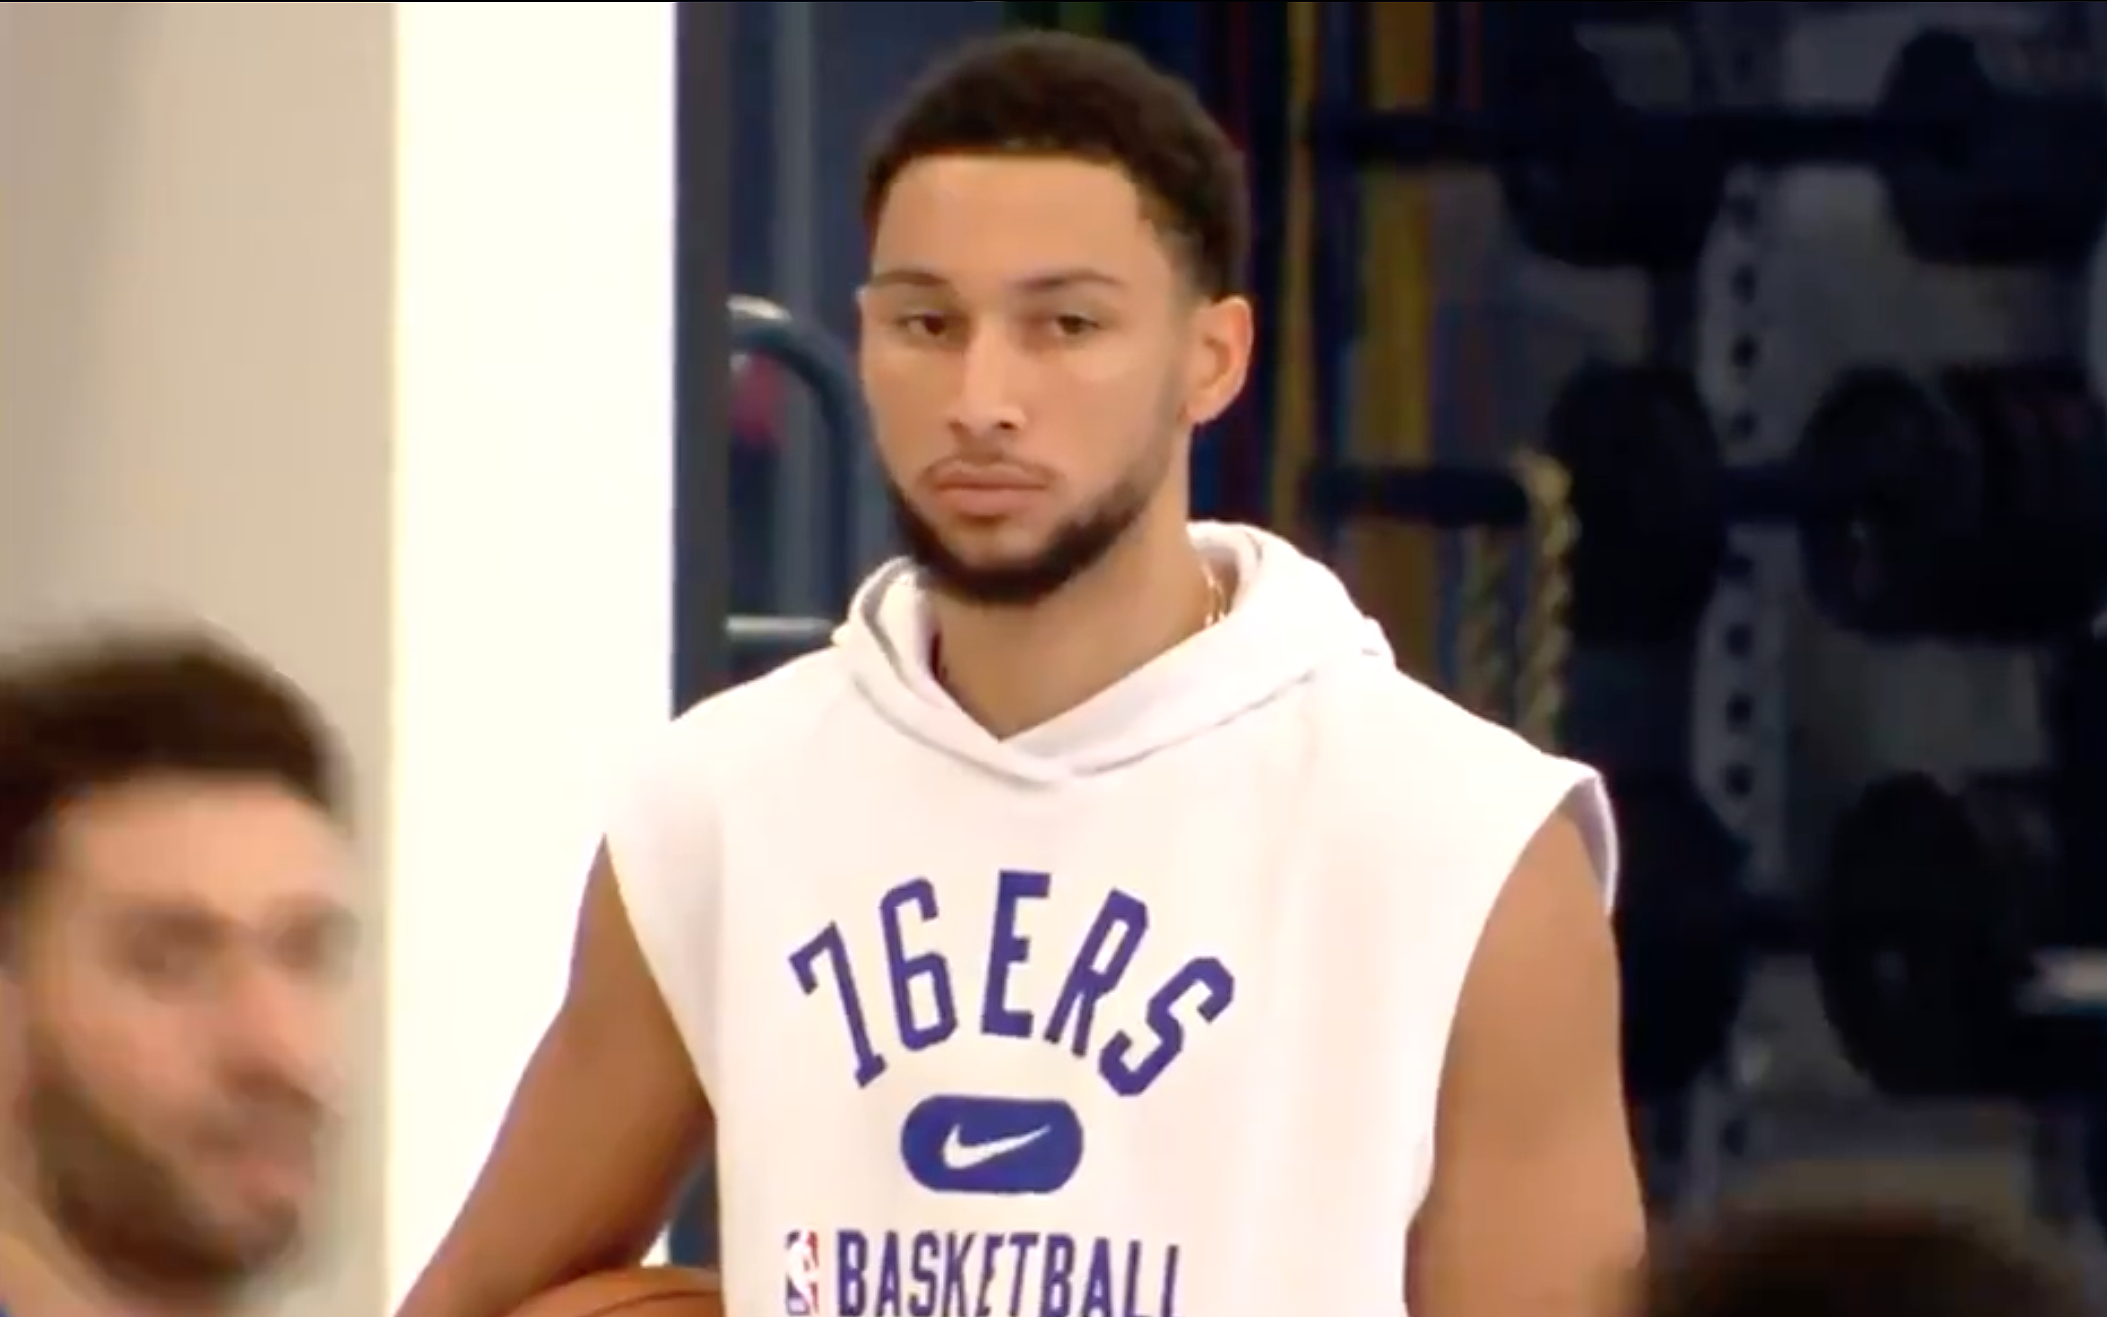 Everything we know and don't know about Ben Simmons, the